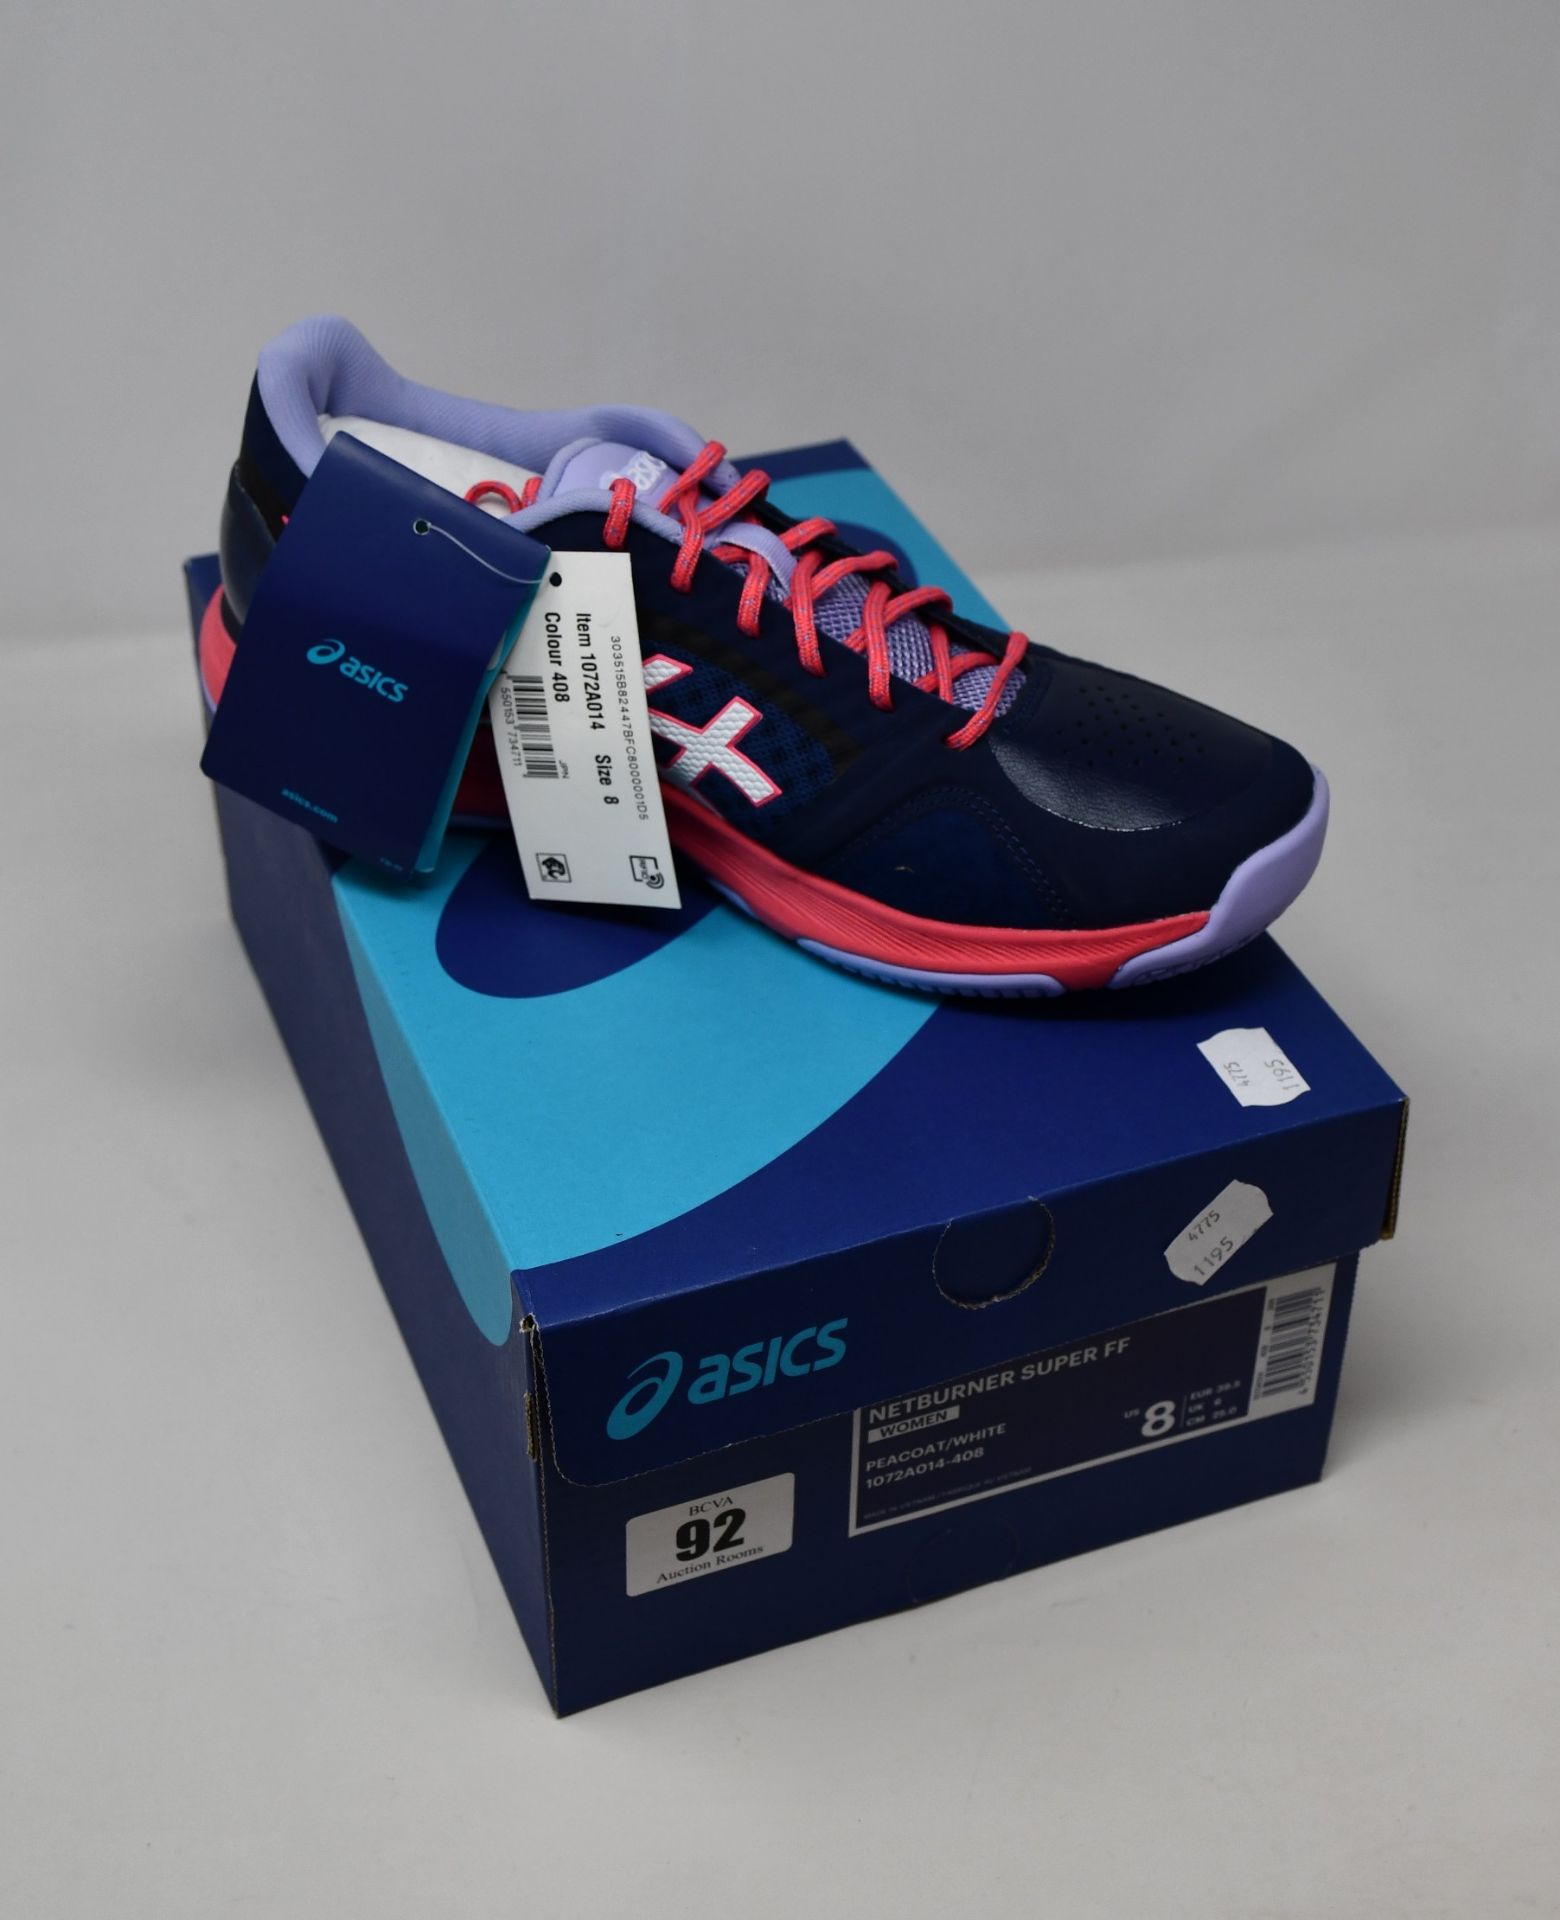 A pair of as new Asics Netburner Super FF trainers (UK 6).